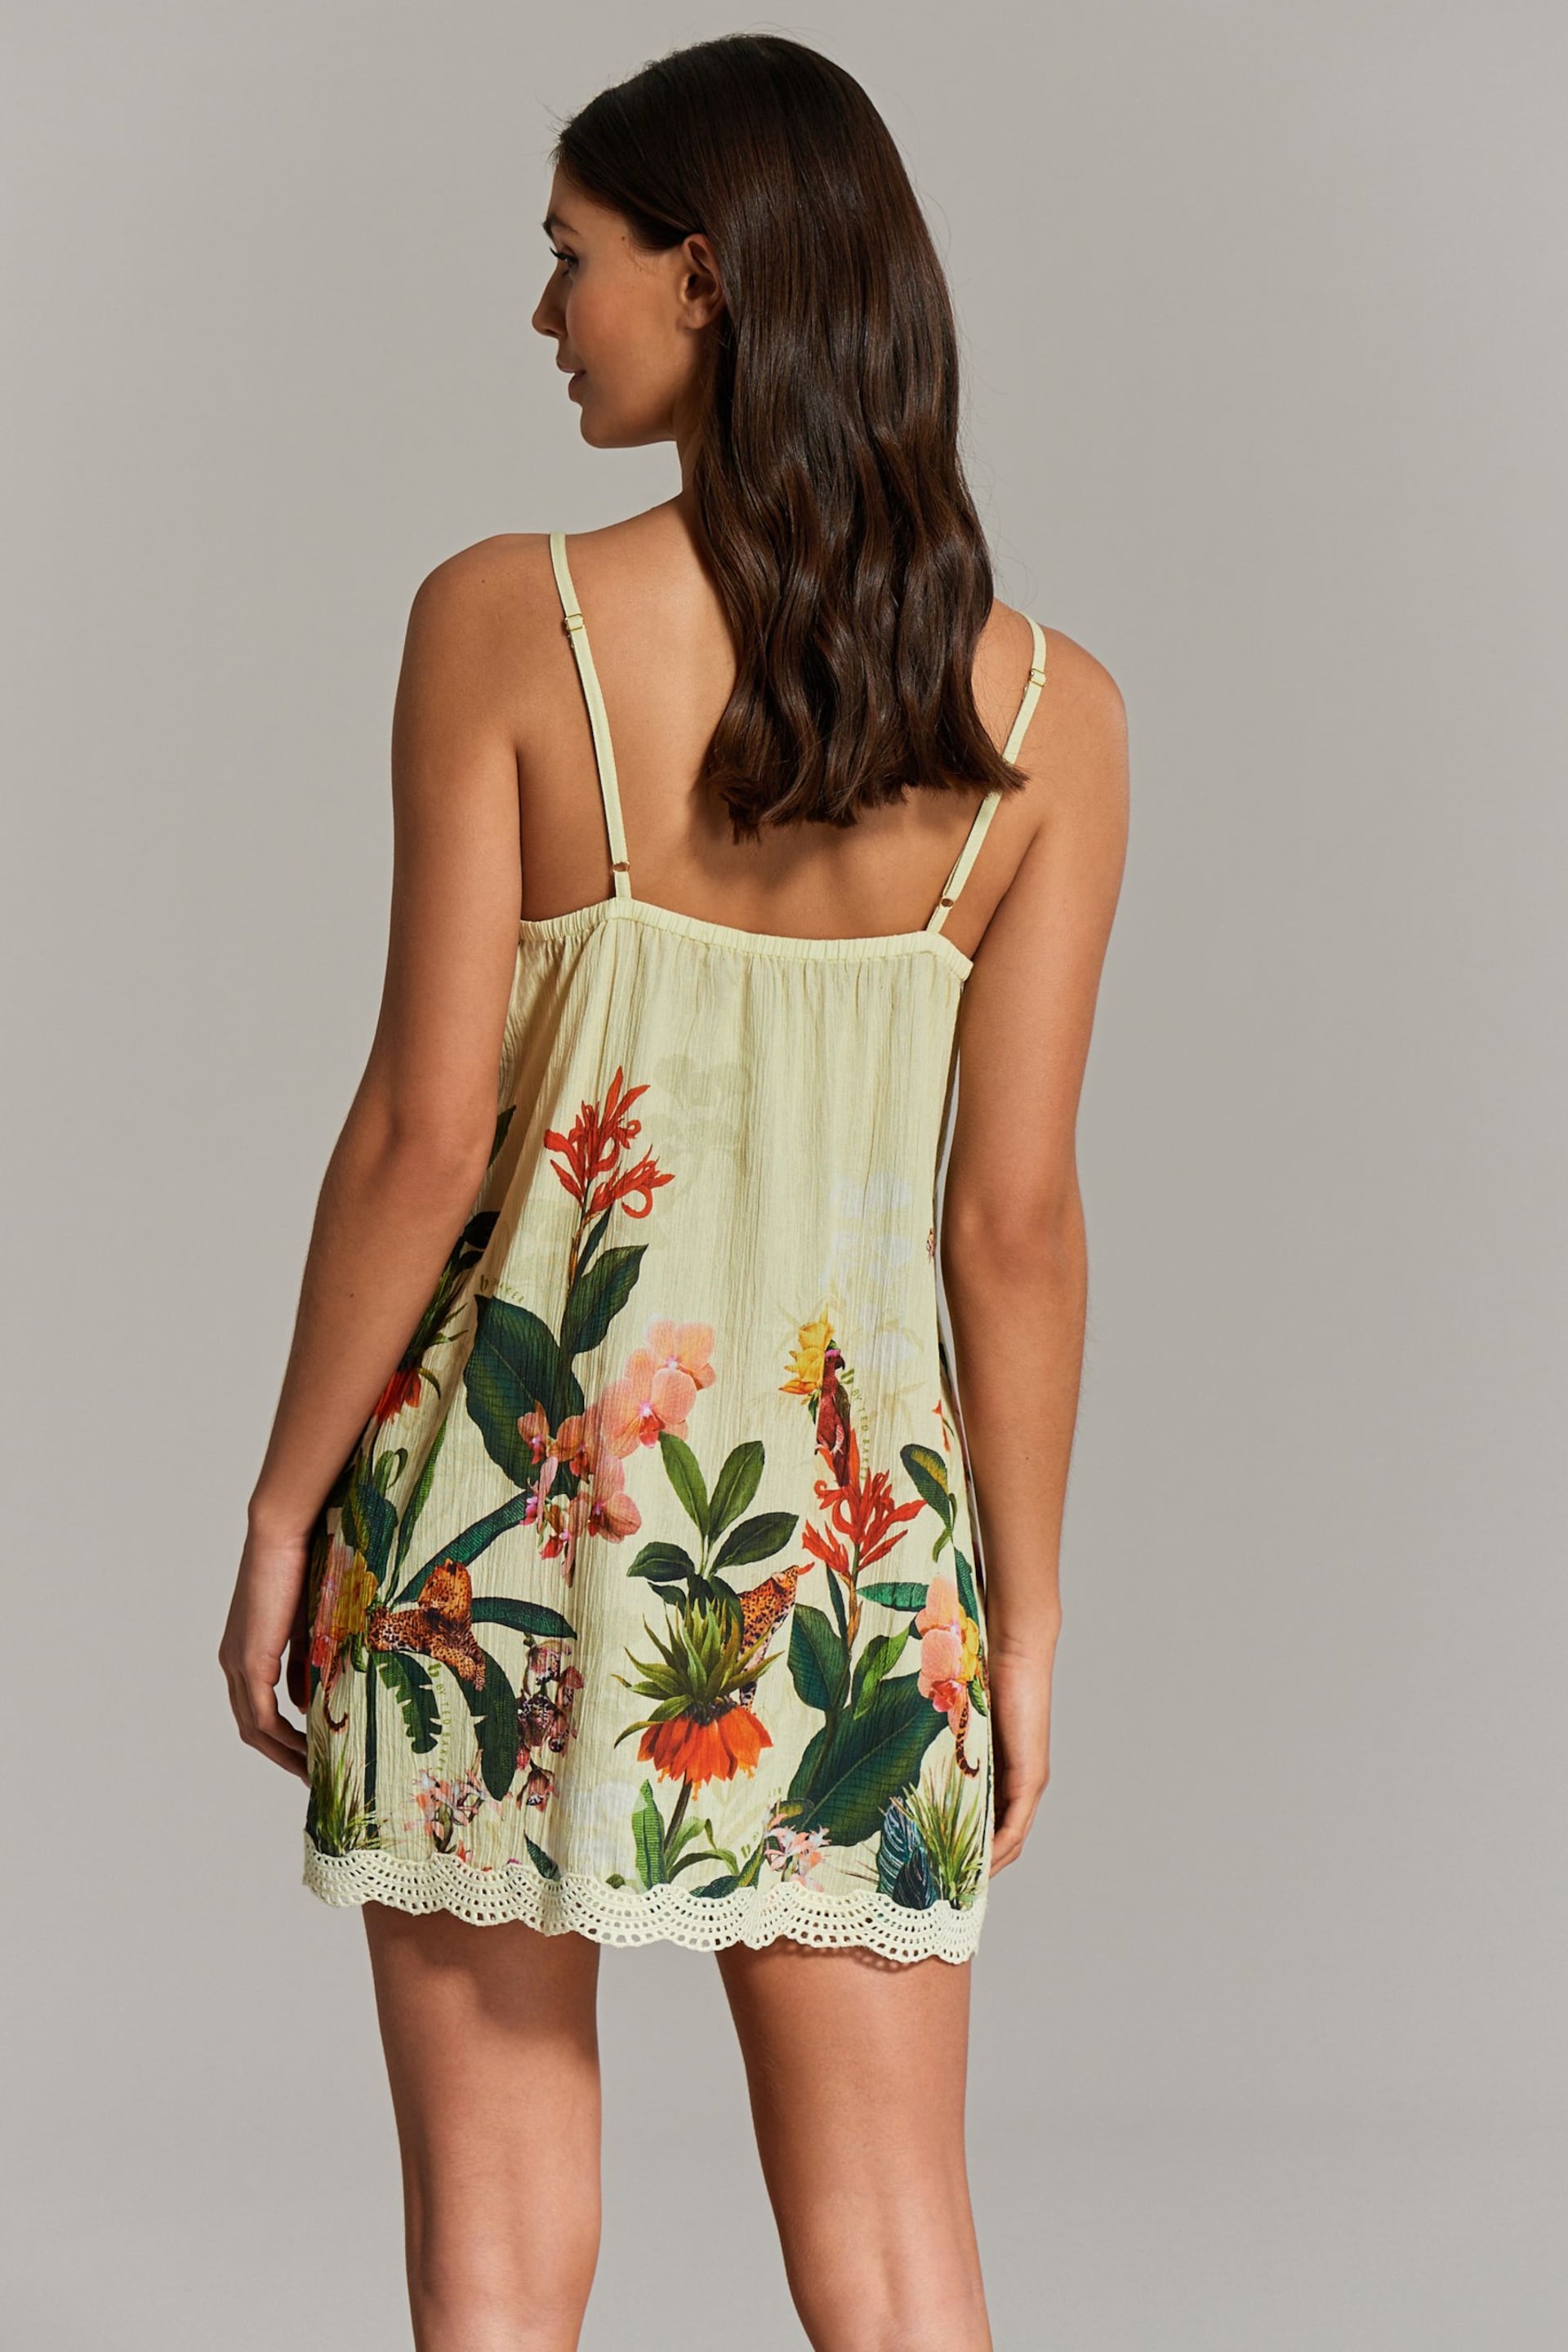 B by Ted Baker Yellow Cotton Slip - Image 3 of 6